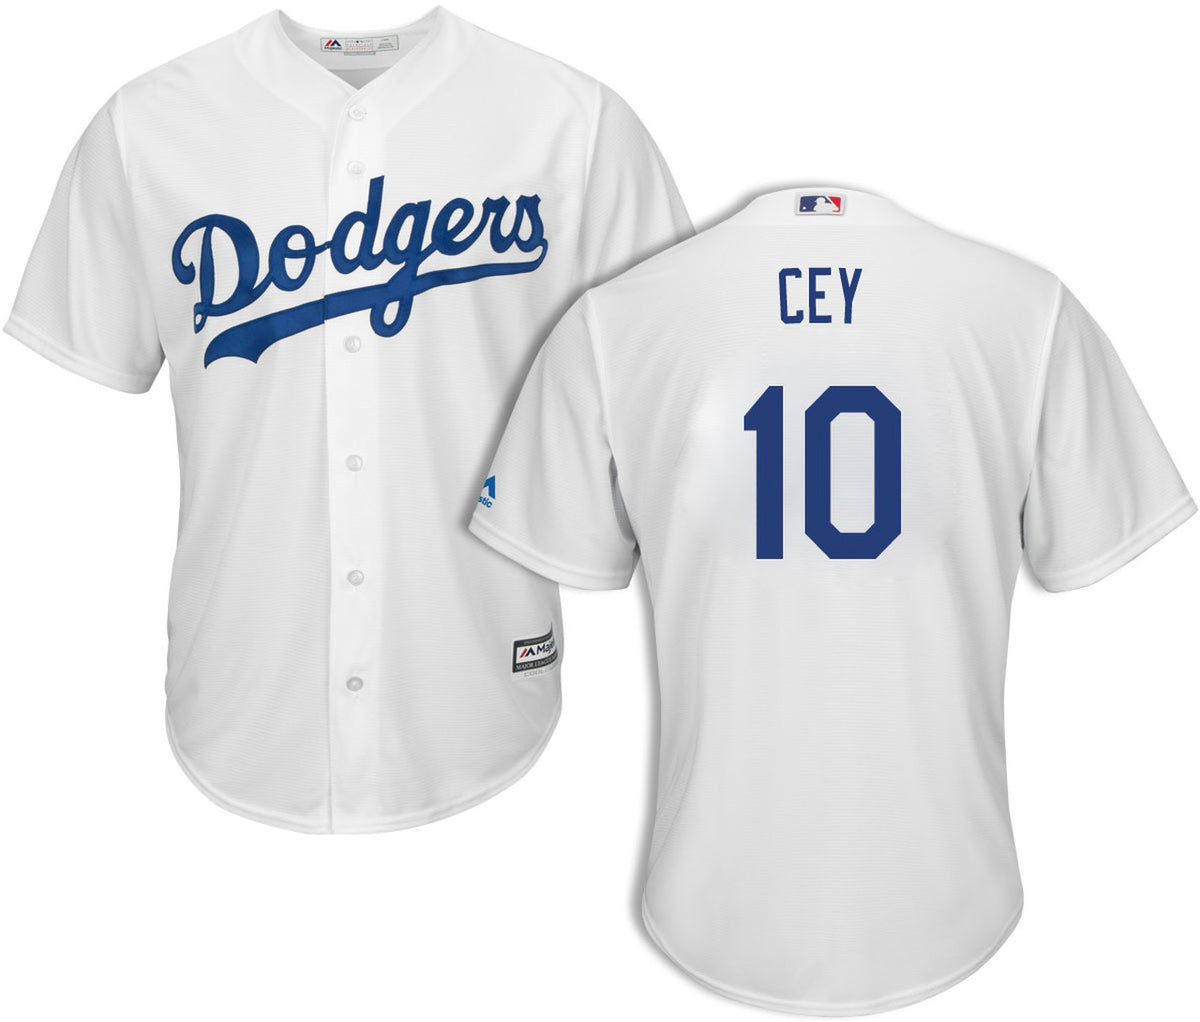 Los Angeles Dodgers Mens Jersey Majestic Throwback #10 Cey Replica